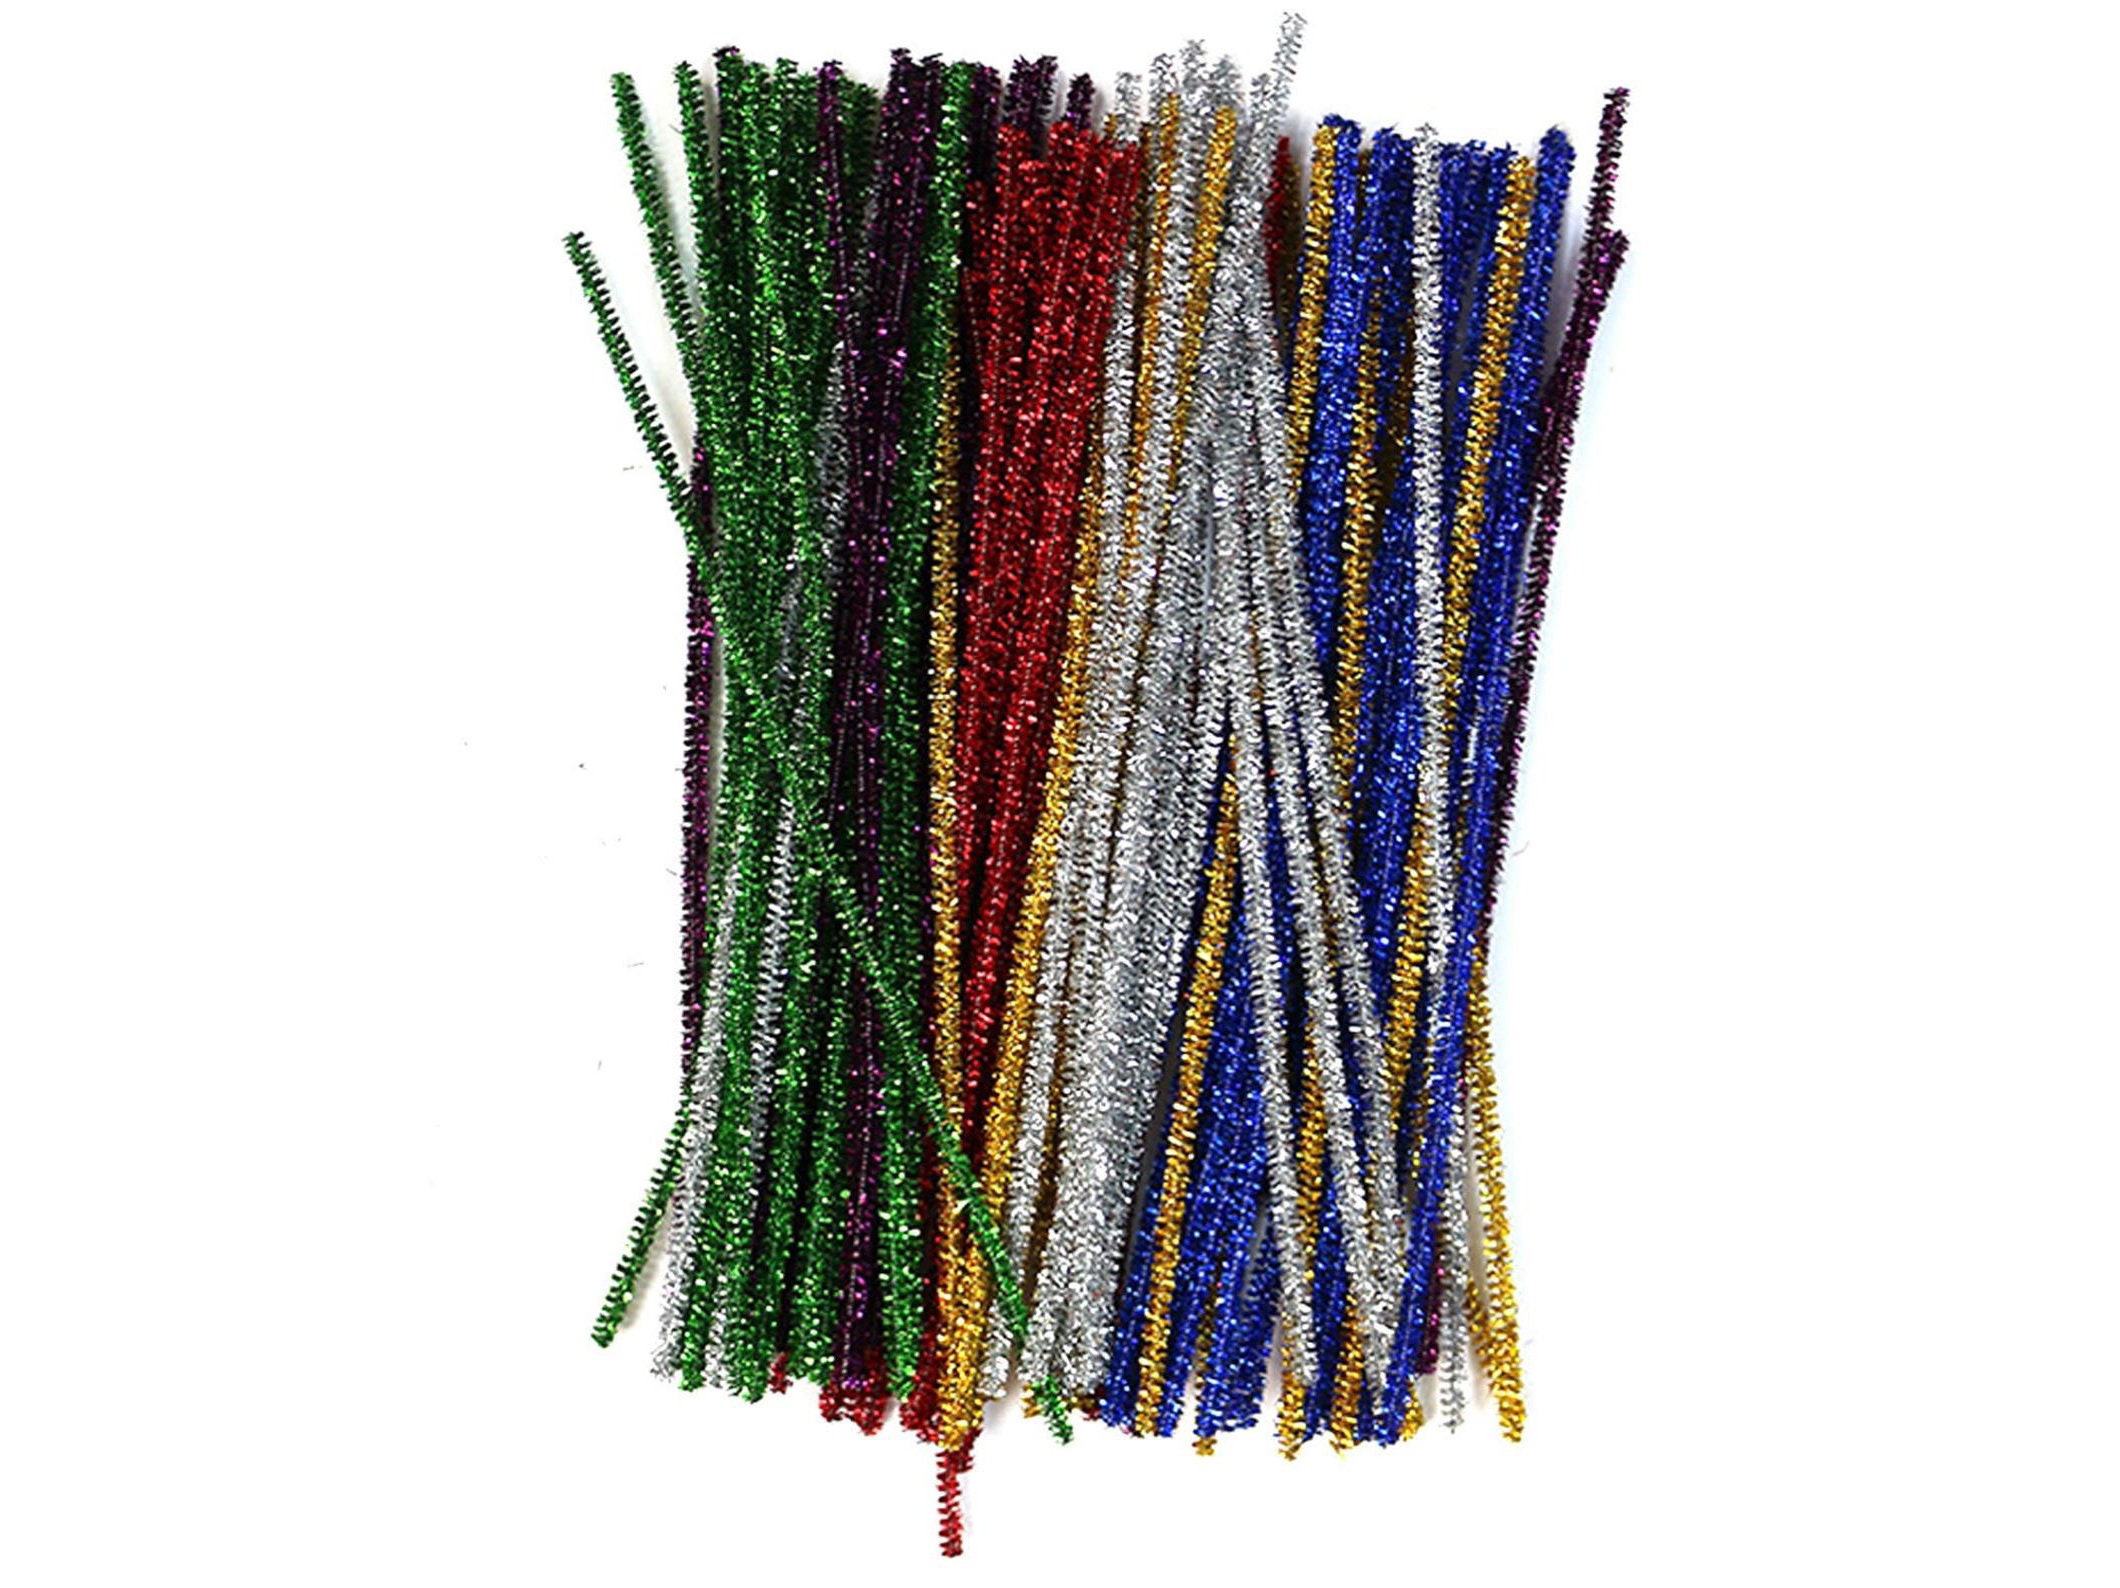 Chenille Stems Pipe Cleaner Tinsel Stems Wired Sticks for Making Toy Bears  Bunnies 8mmx 50cm Set of 5 